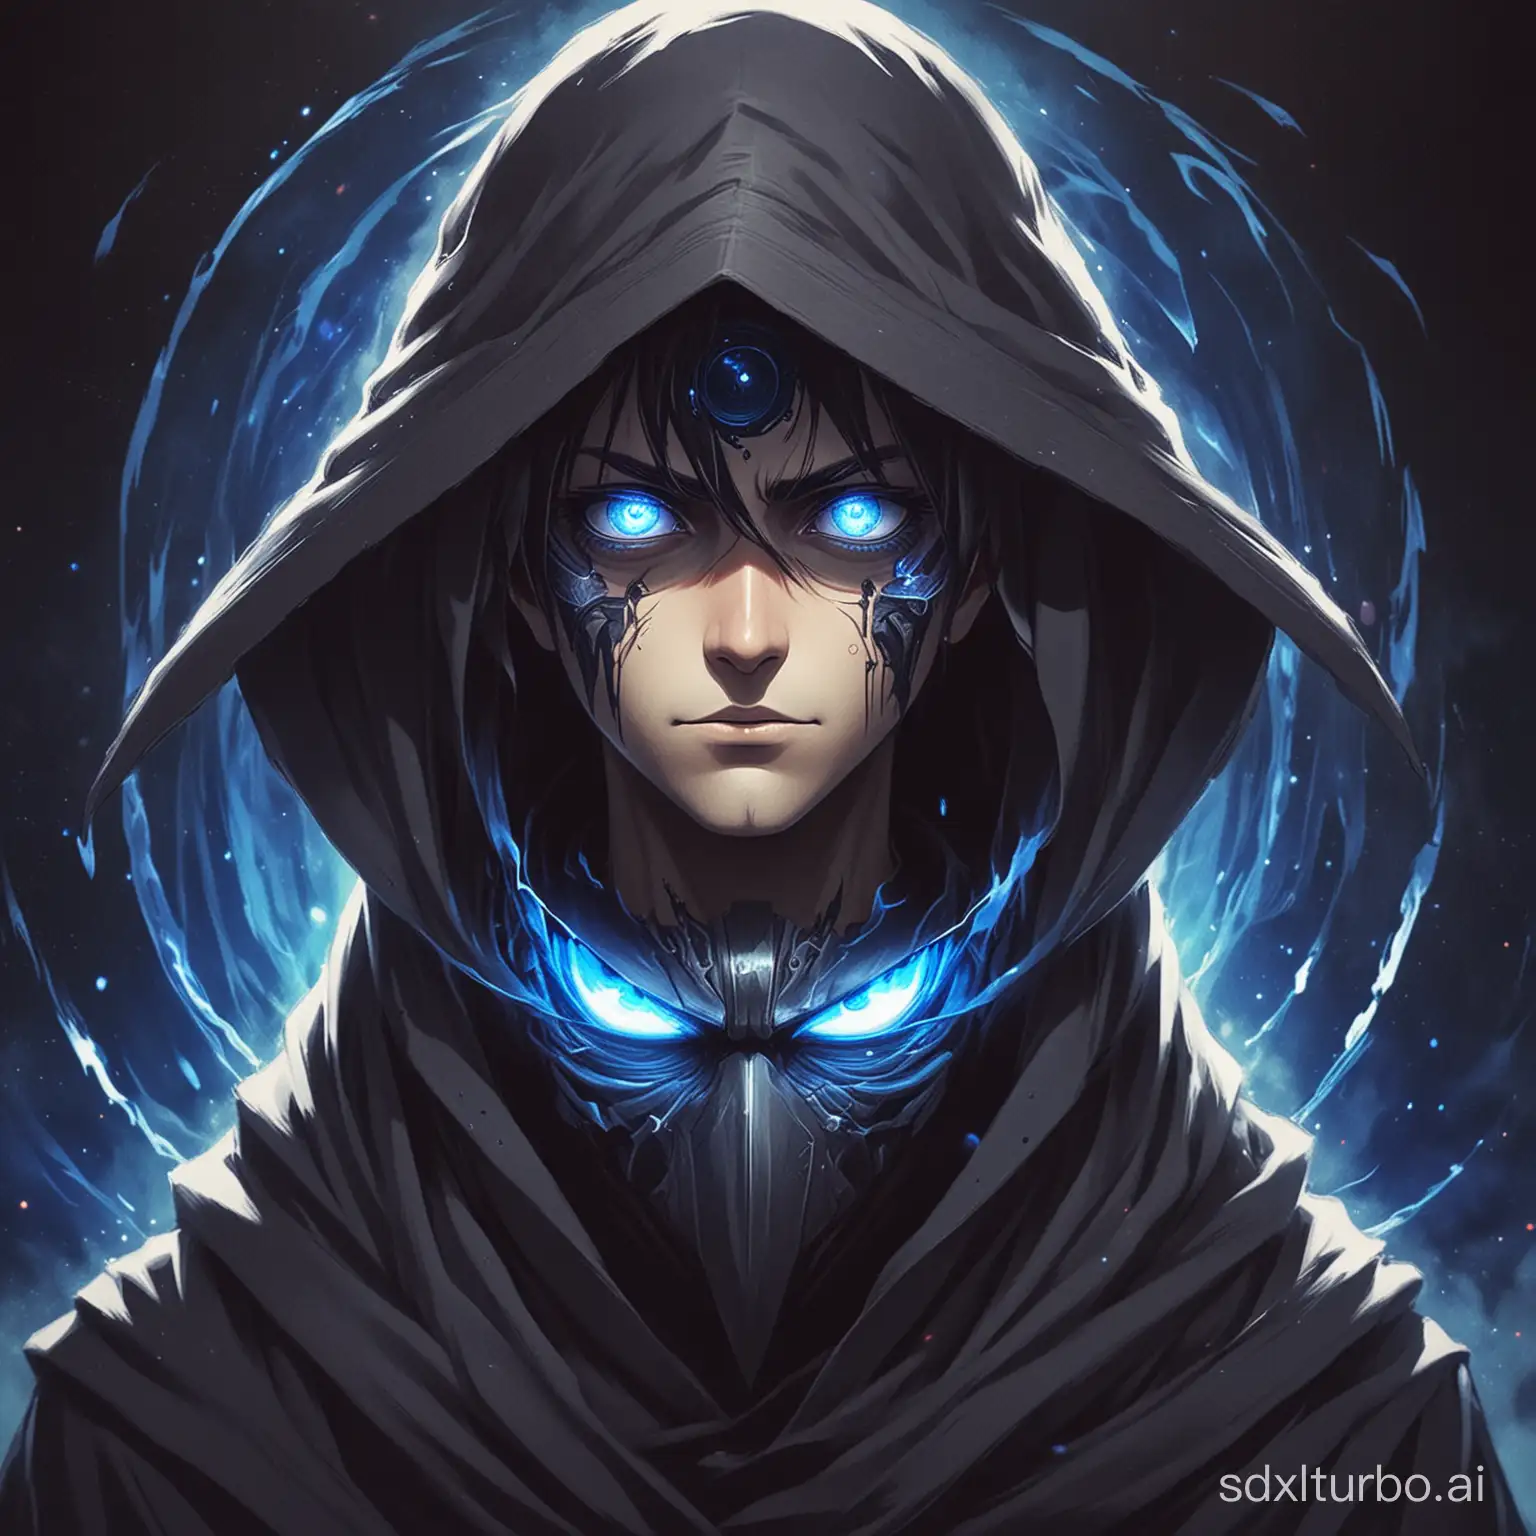 Mystical-Anime-Reaper-with-Rinnegan-Eyes-and-Blue-Magic-Hat